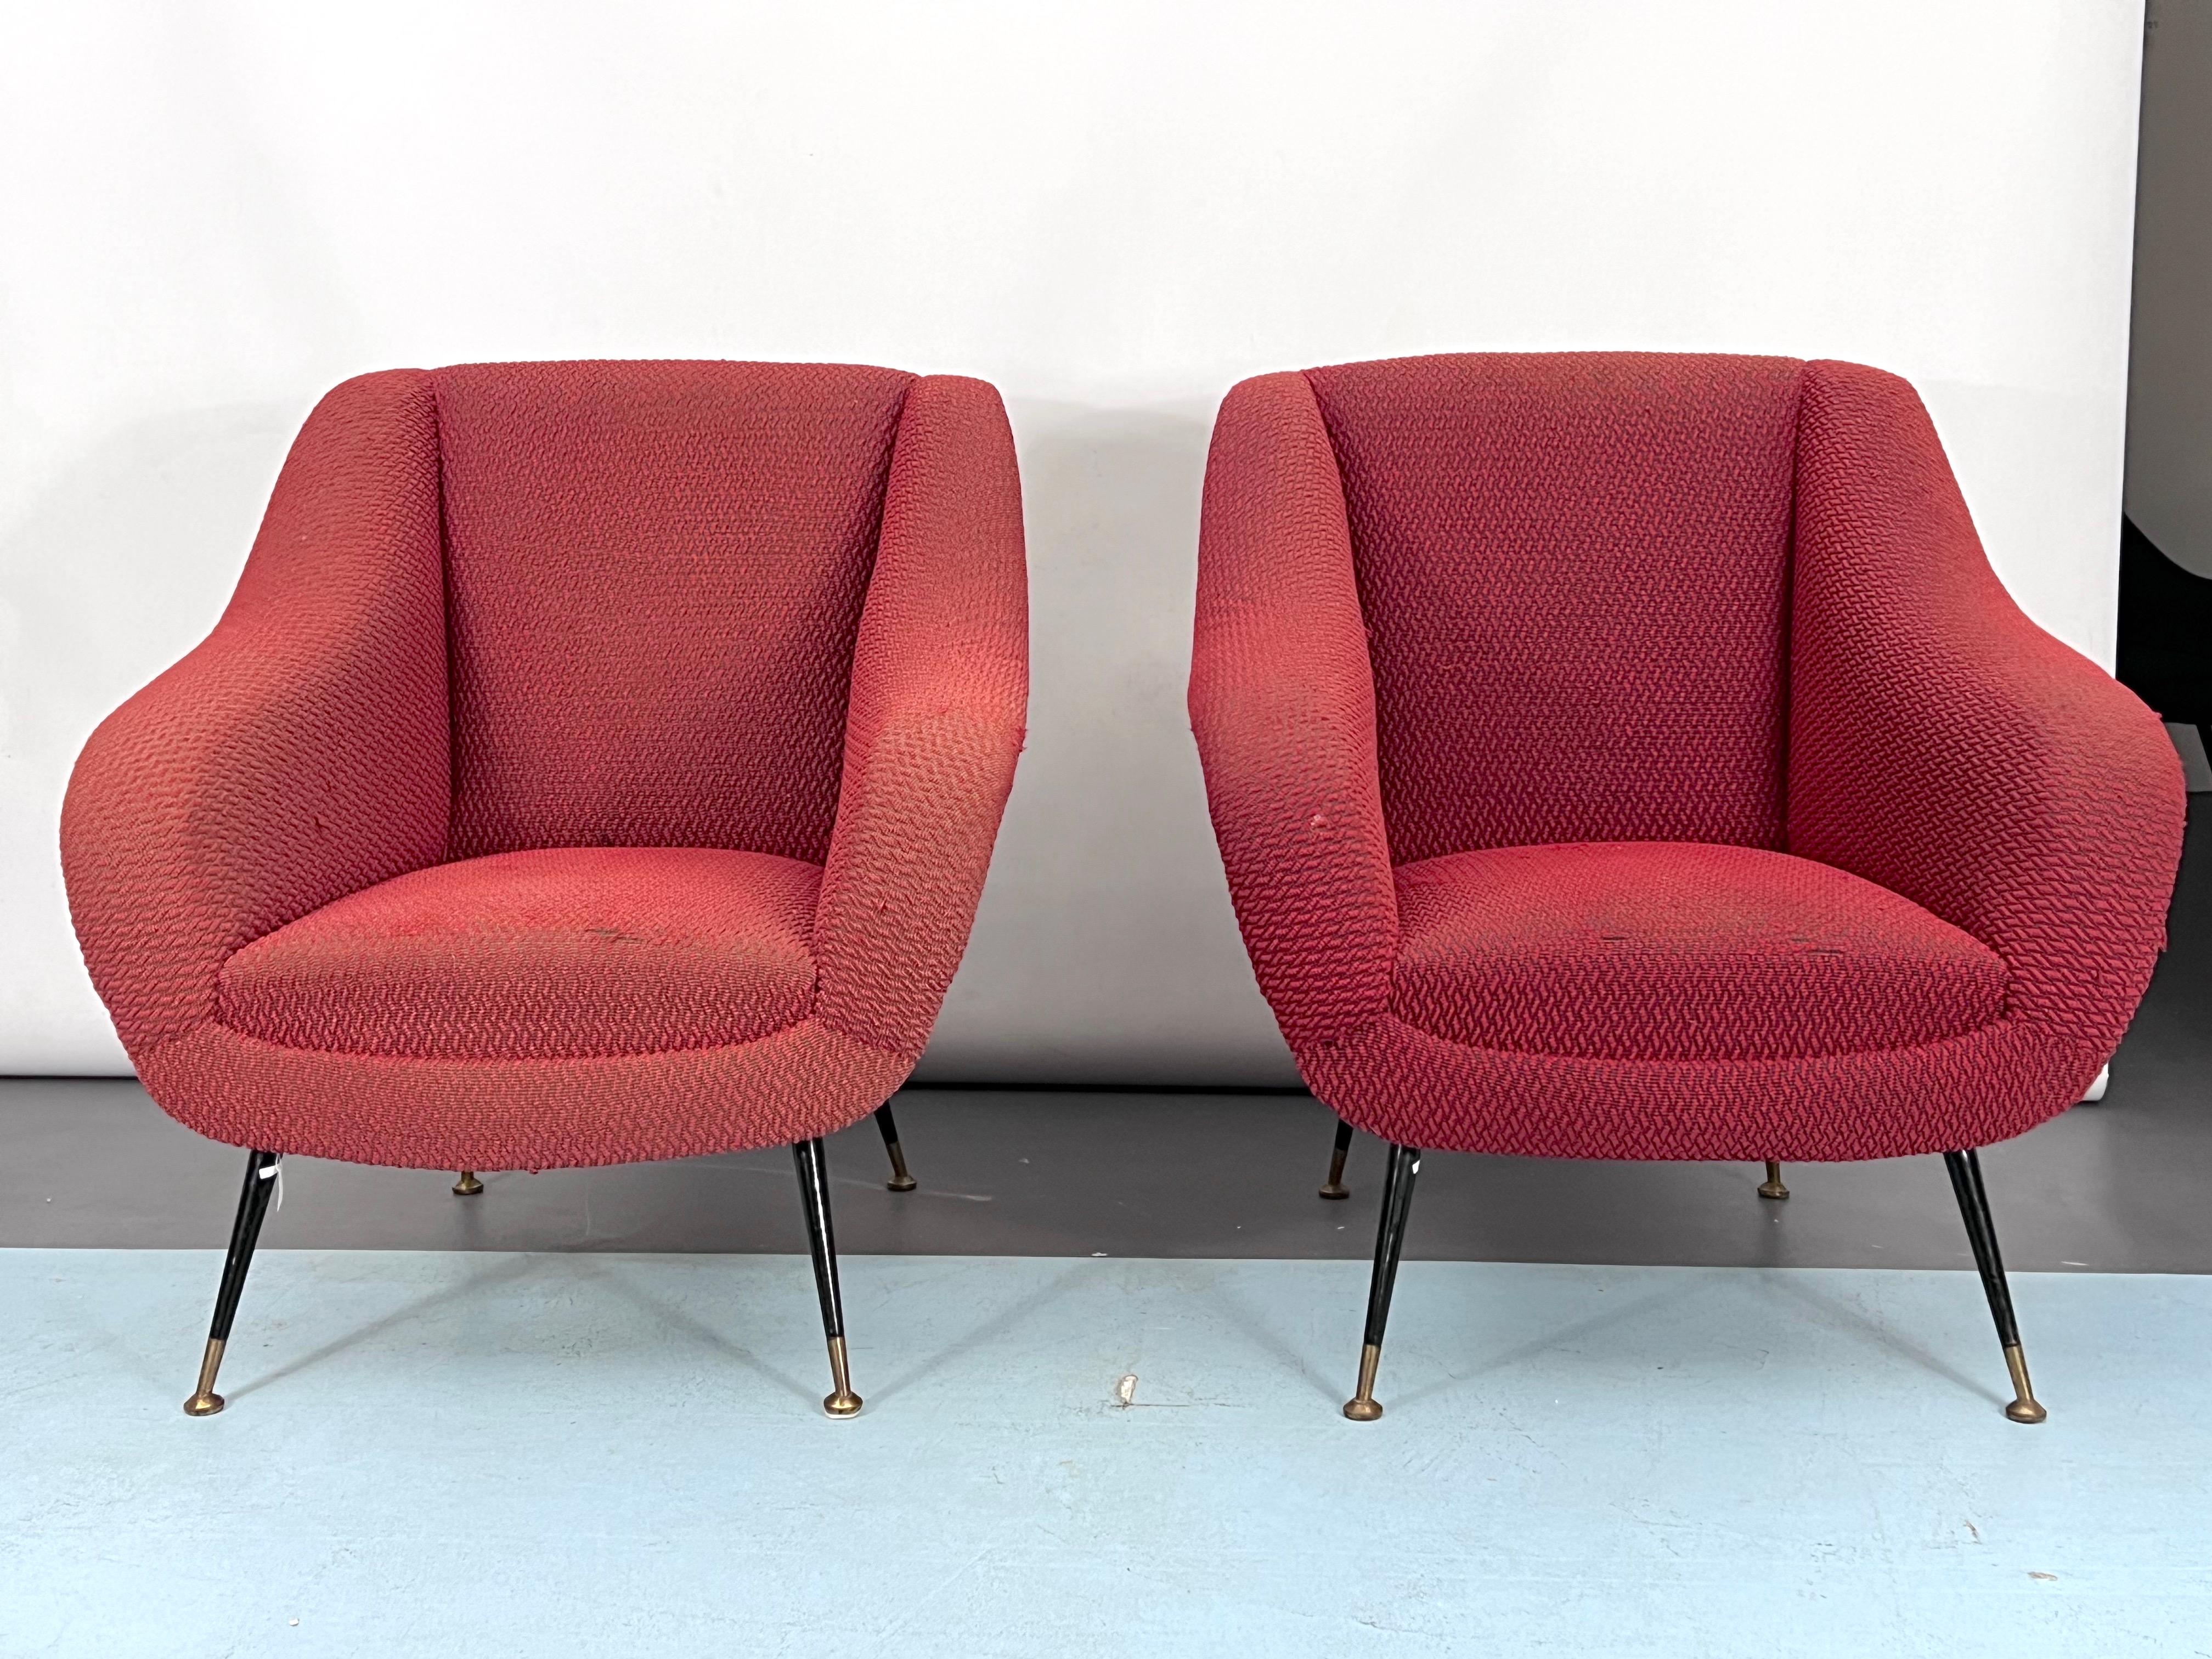 Mid-Century Pair of Lounge Chairs by Gigi Radice for Minotti, Italy, 1950s For Sale 1